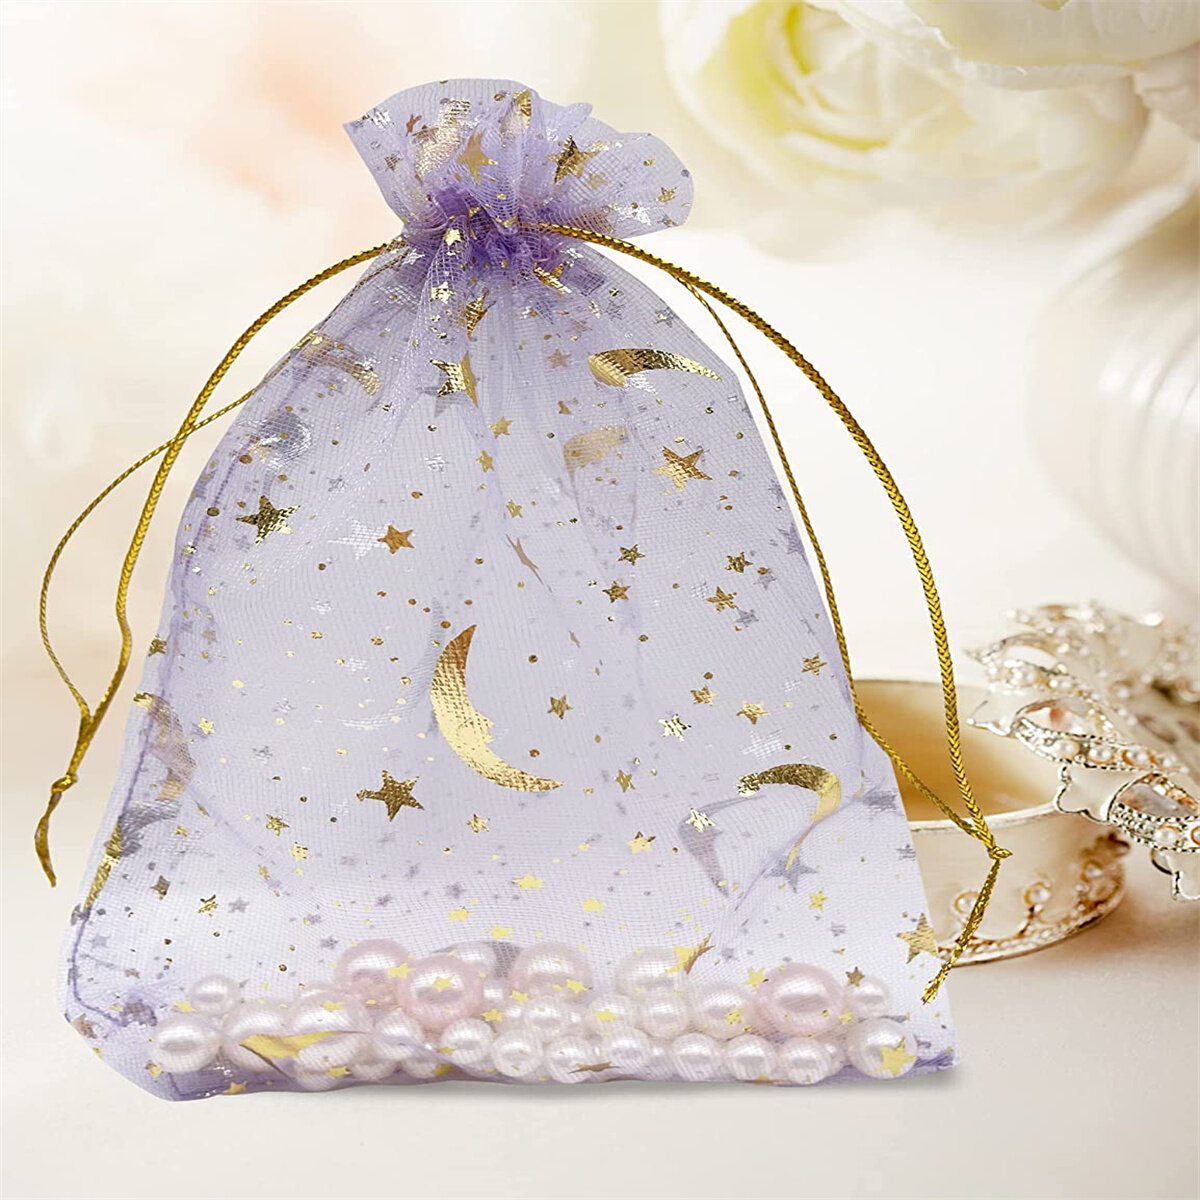 50 100 Star Moon Organza Gift Bags Wedding Jewelry Drawstring Party Pouches 